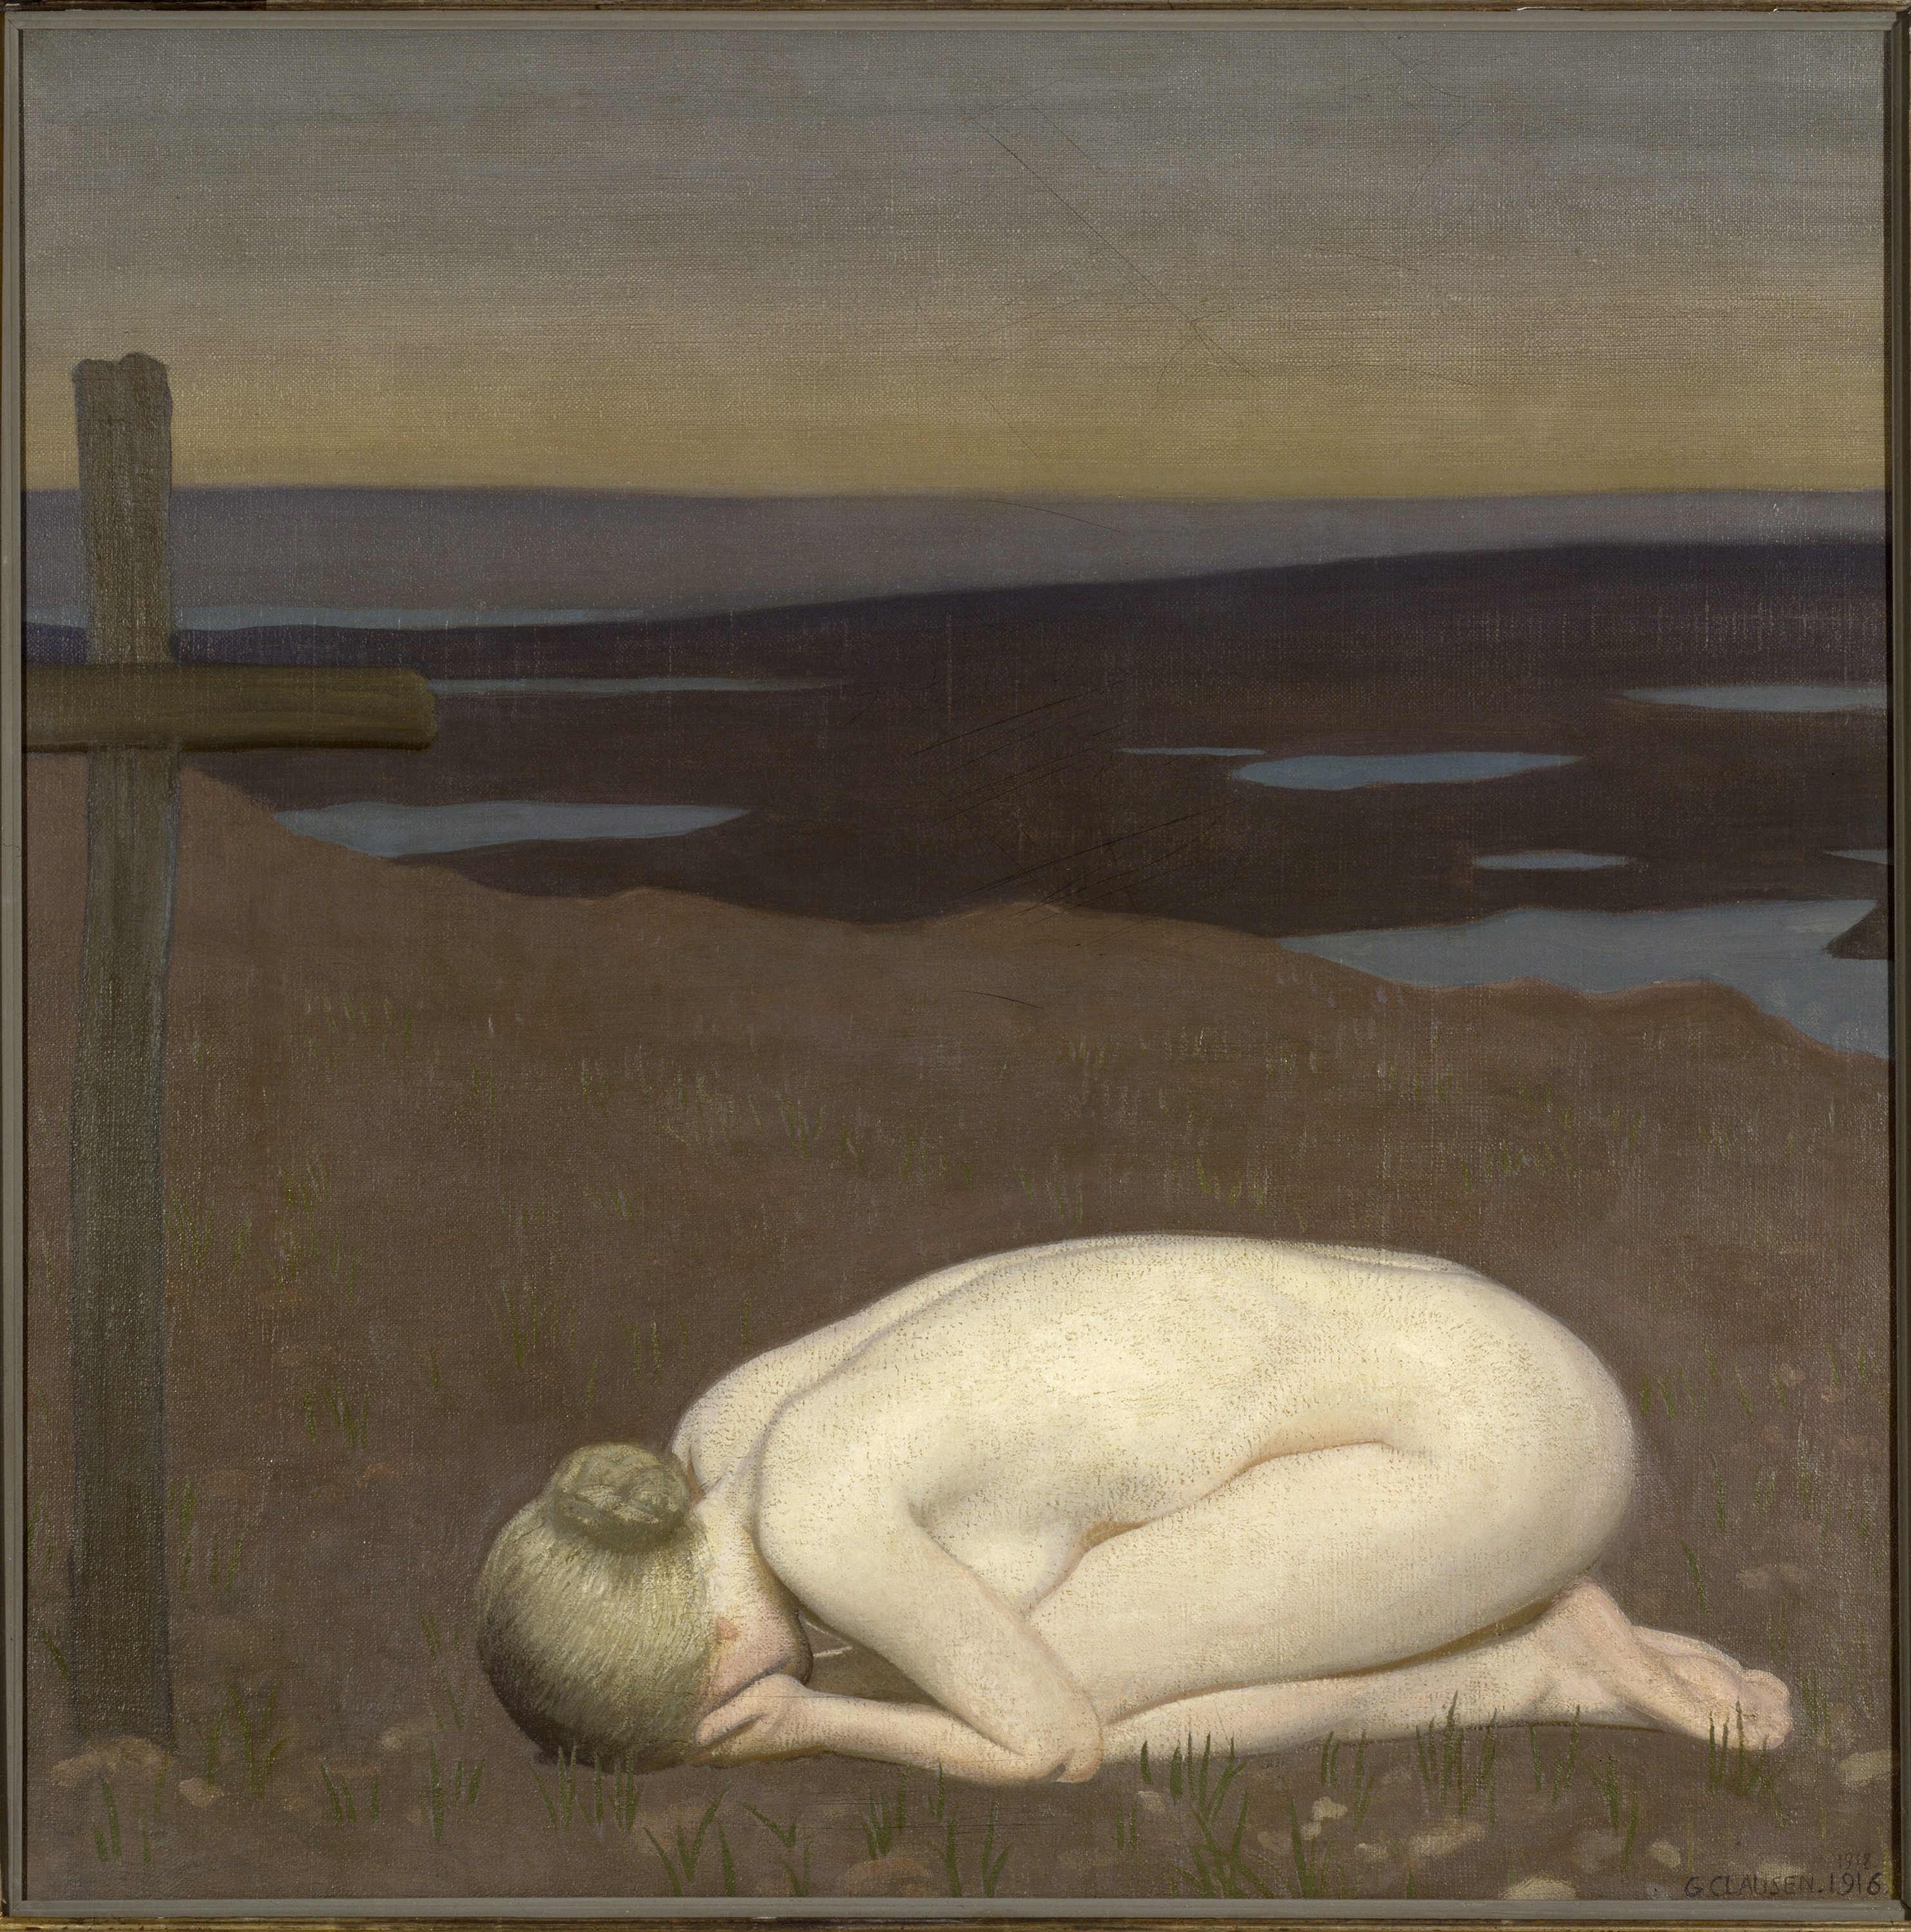 Youth Mourning by George Clausen - 1916 - 91.4 x 91.4 cm Imperial War Museum